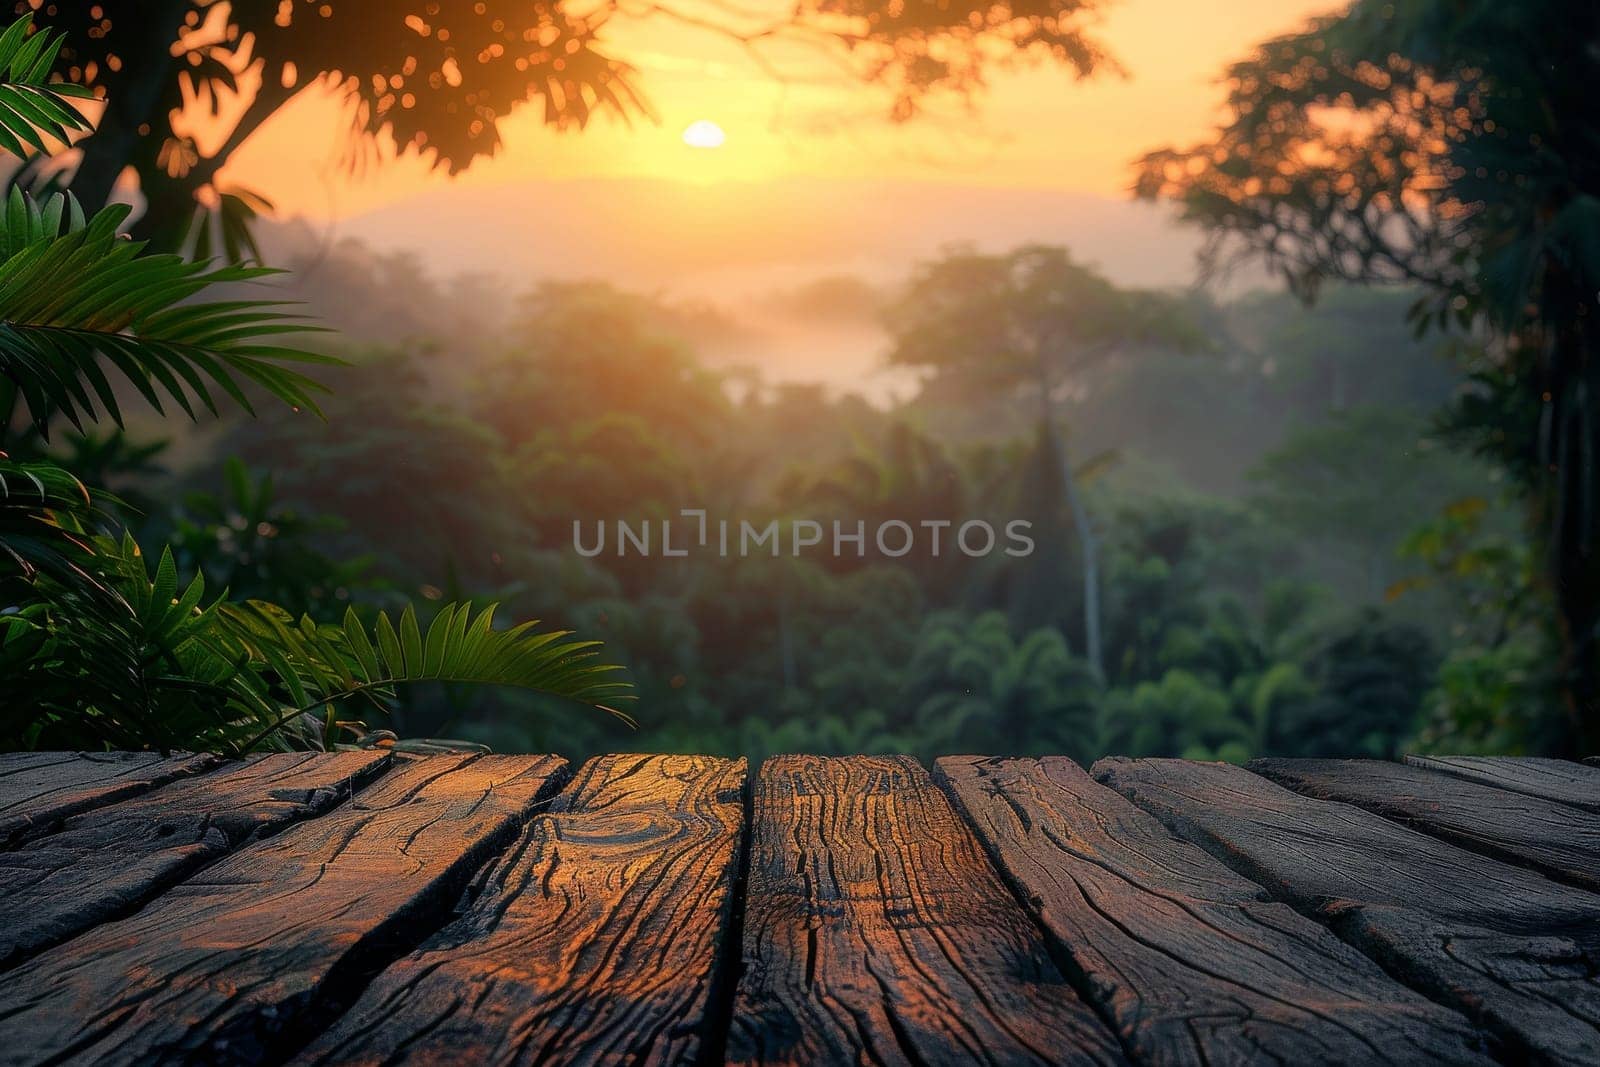 A wooden table with a view of a forest and a sunset in the background.